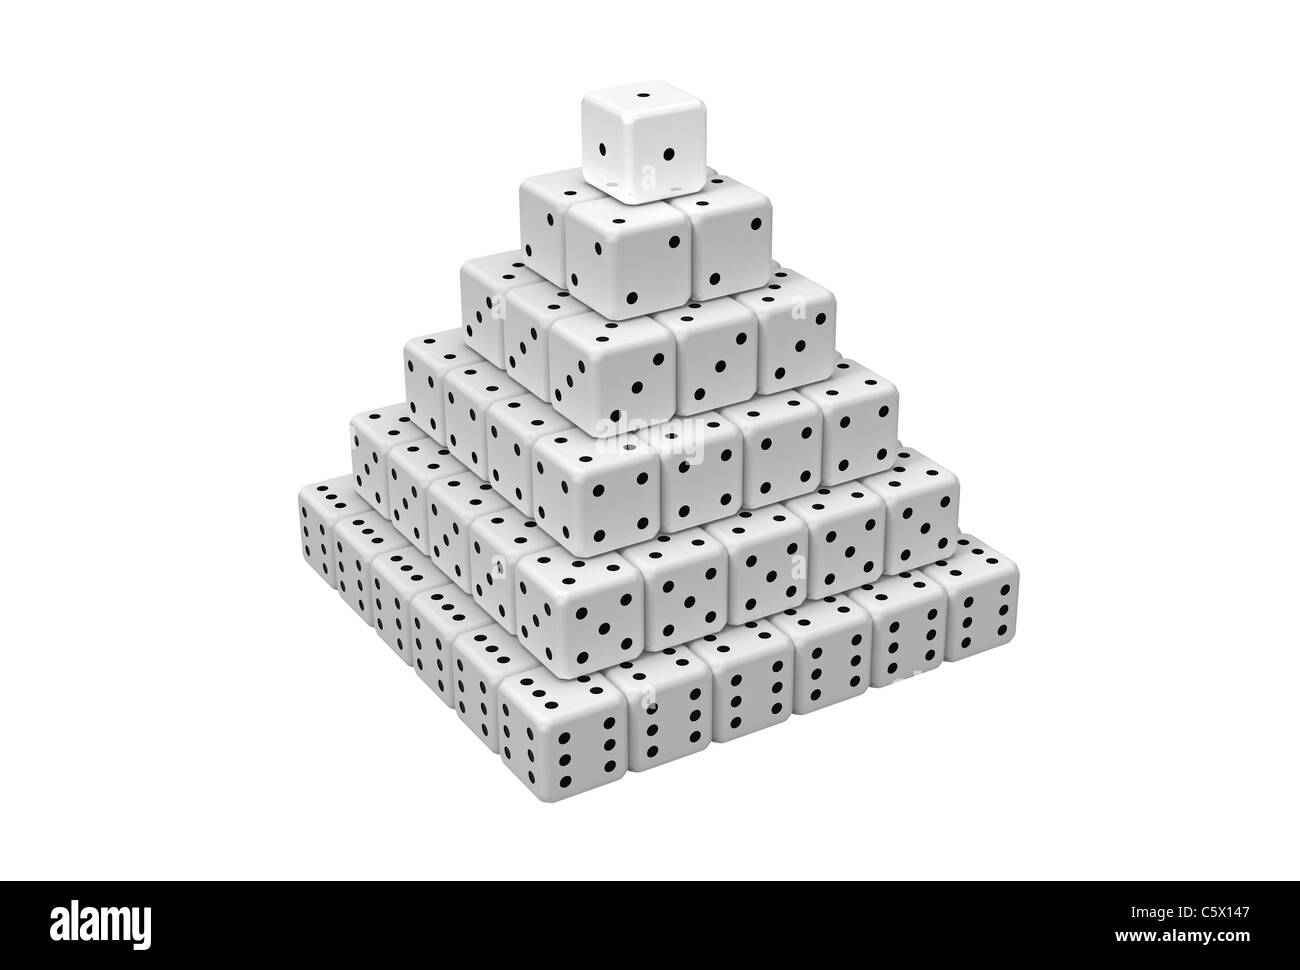 Pyramid made of dices isolated on white 3D render Stock Photo